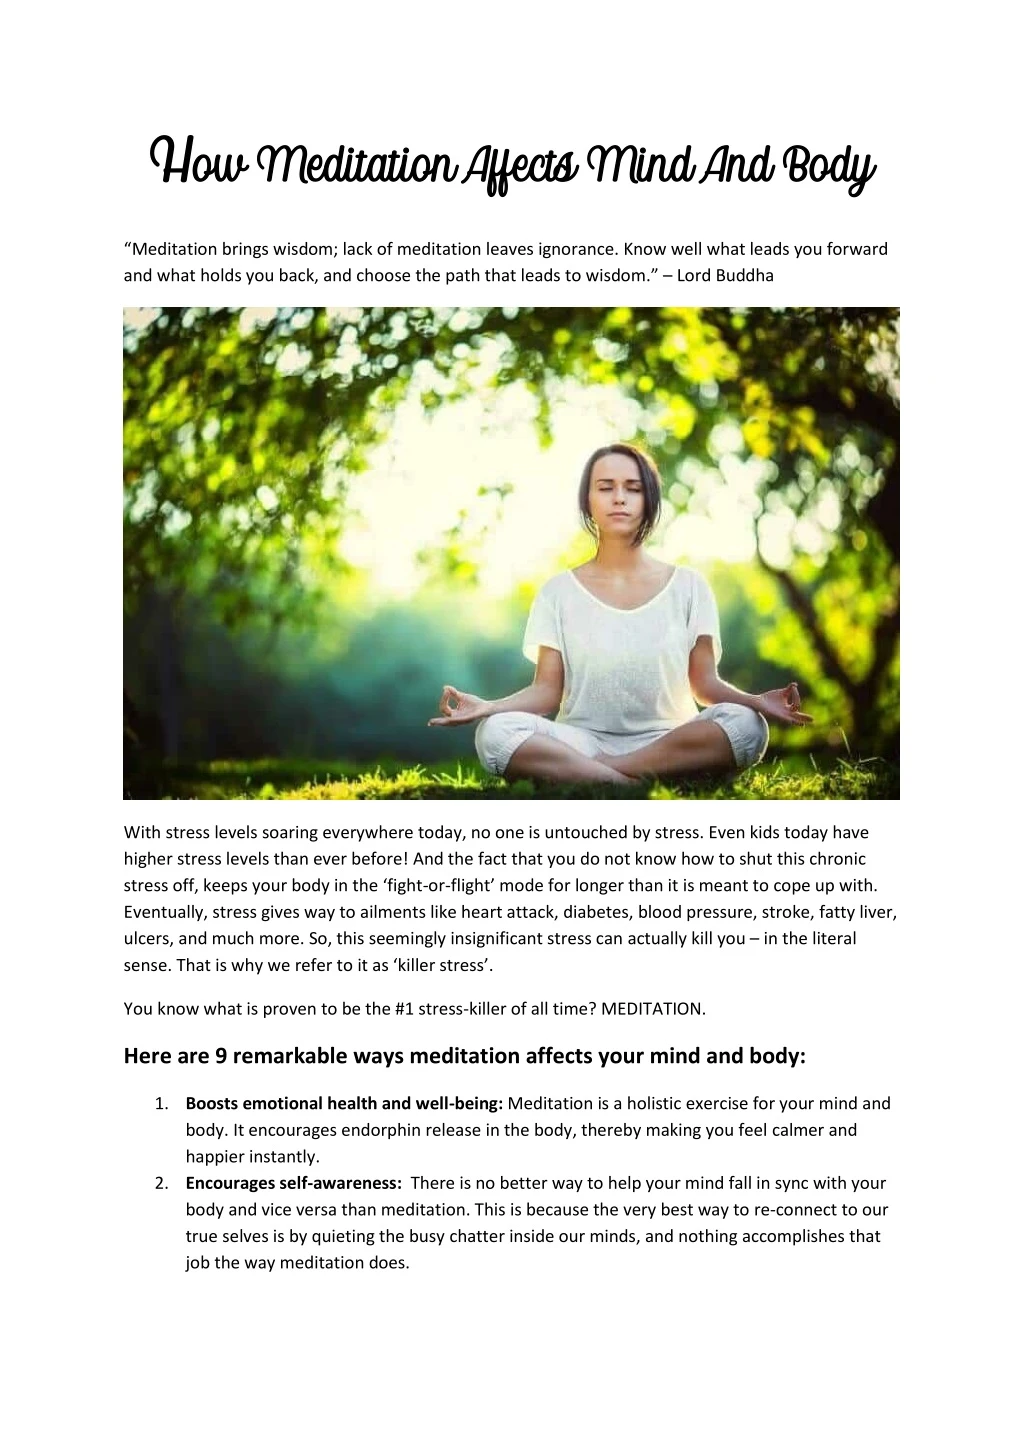 h h ow meditation affects mind and body